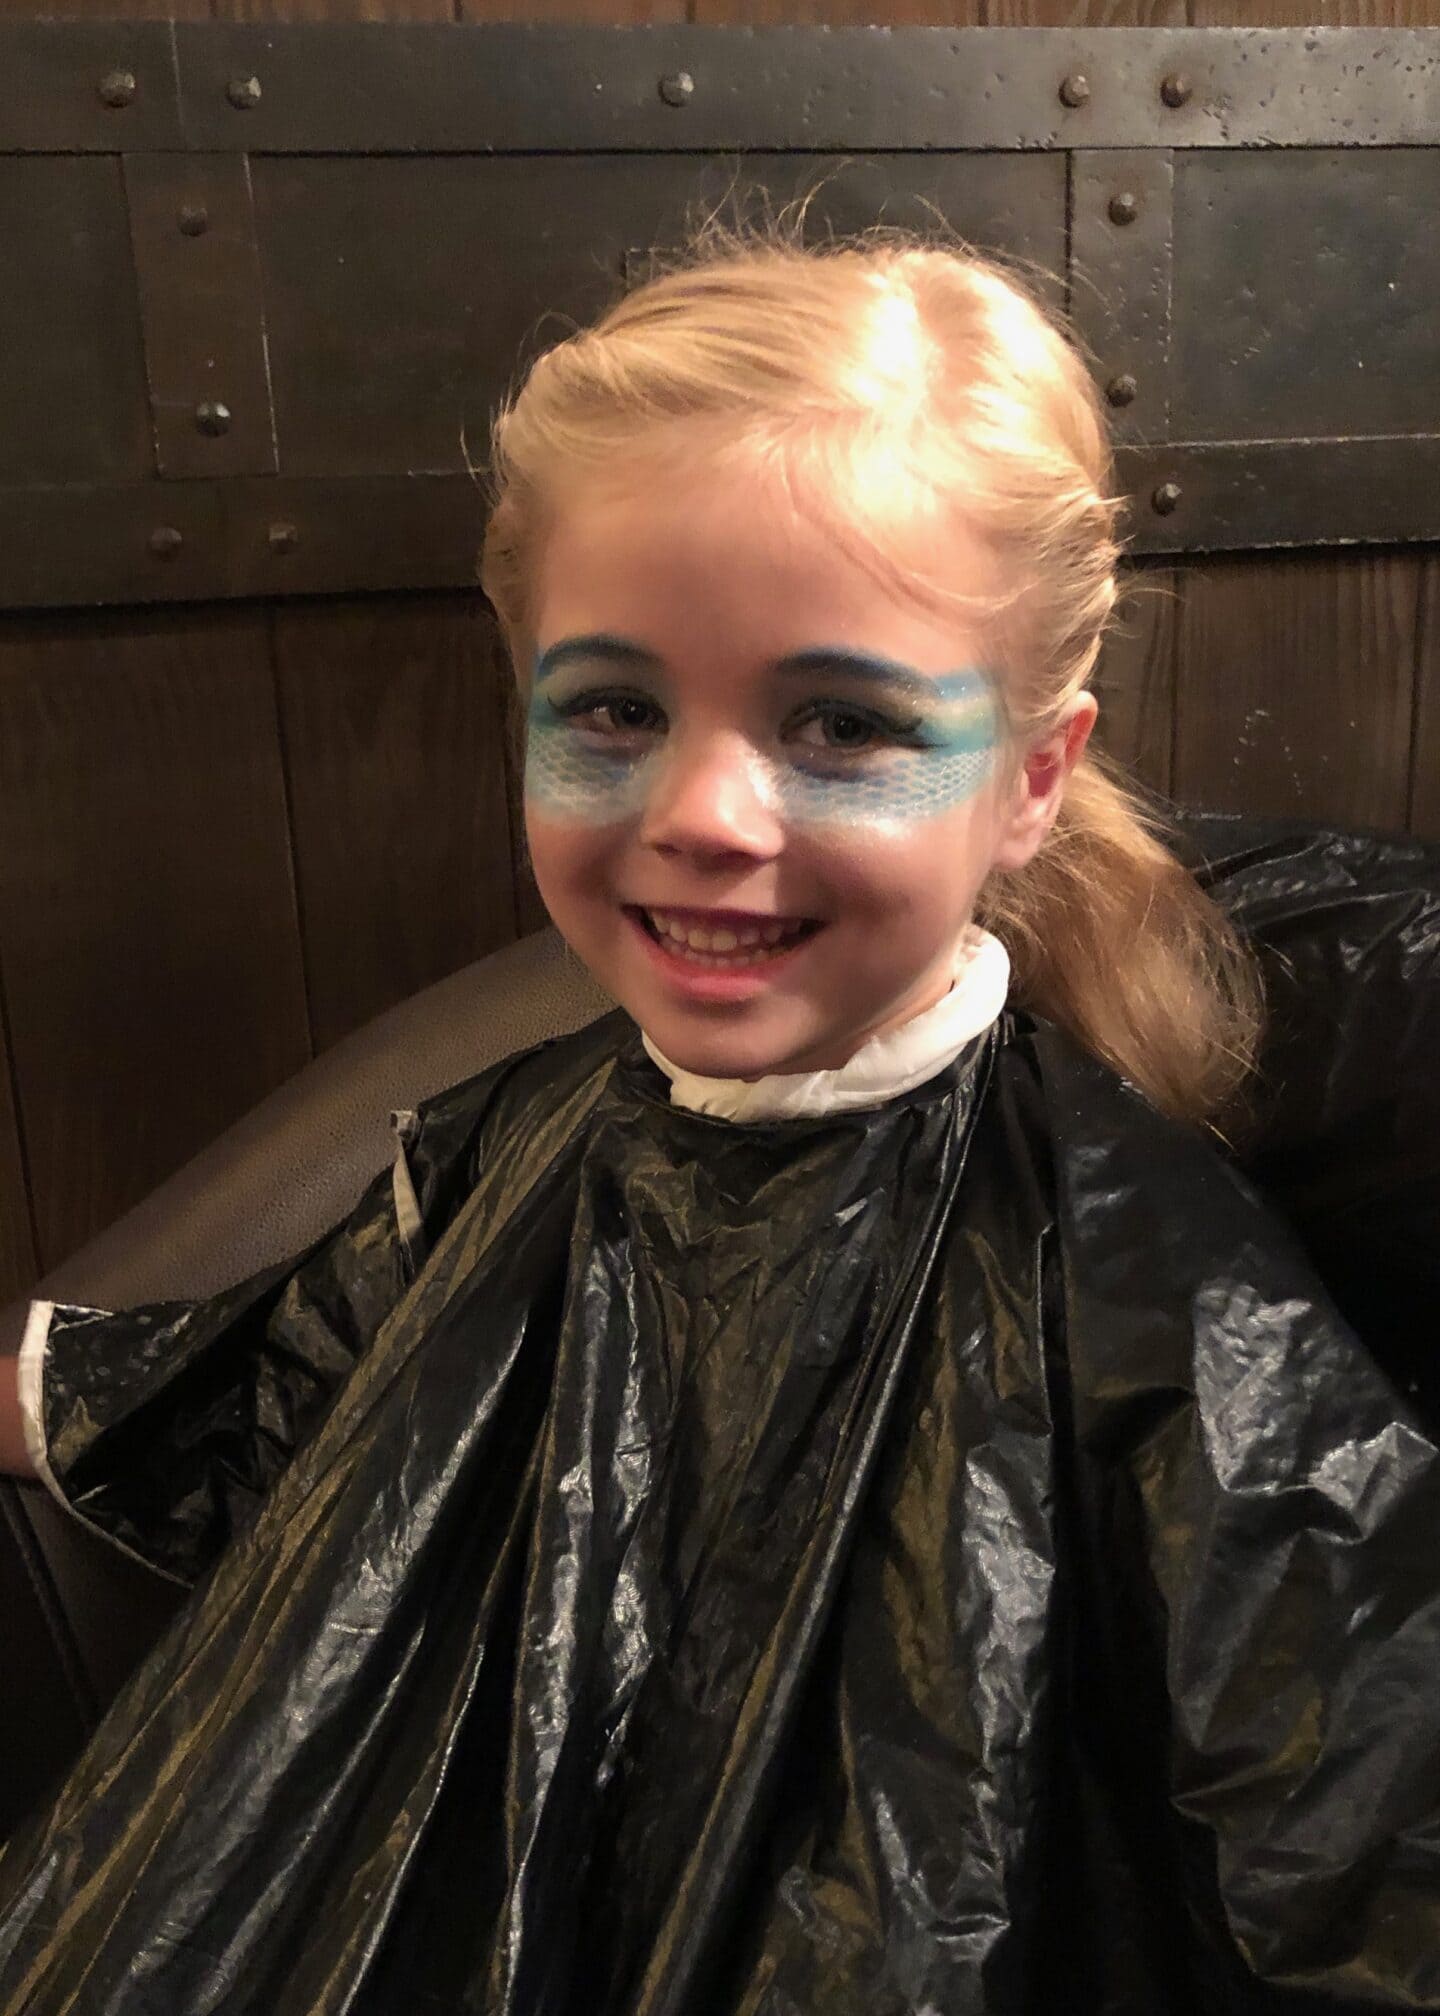 mermaid makeover at Disney World at the pirate's league